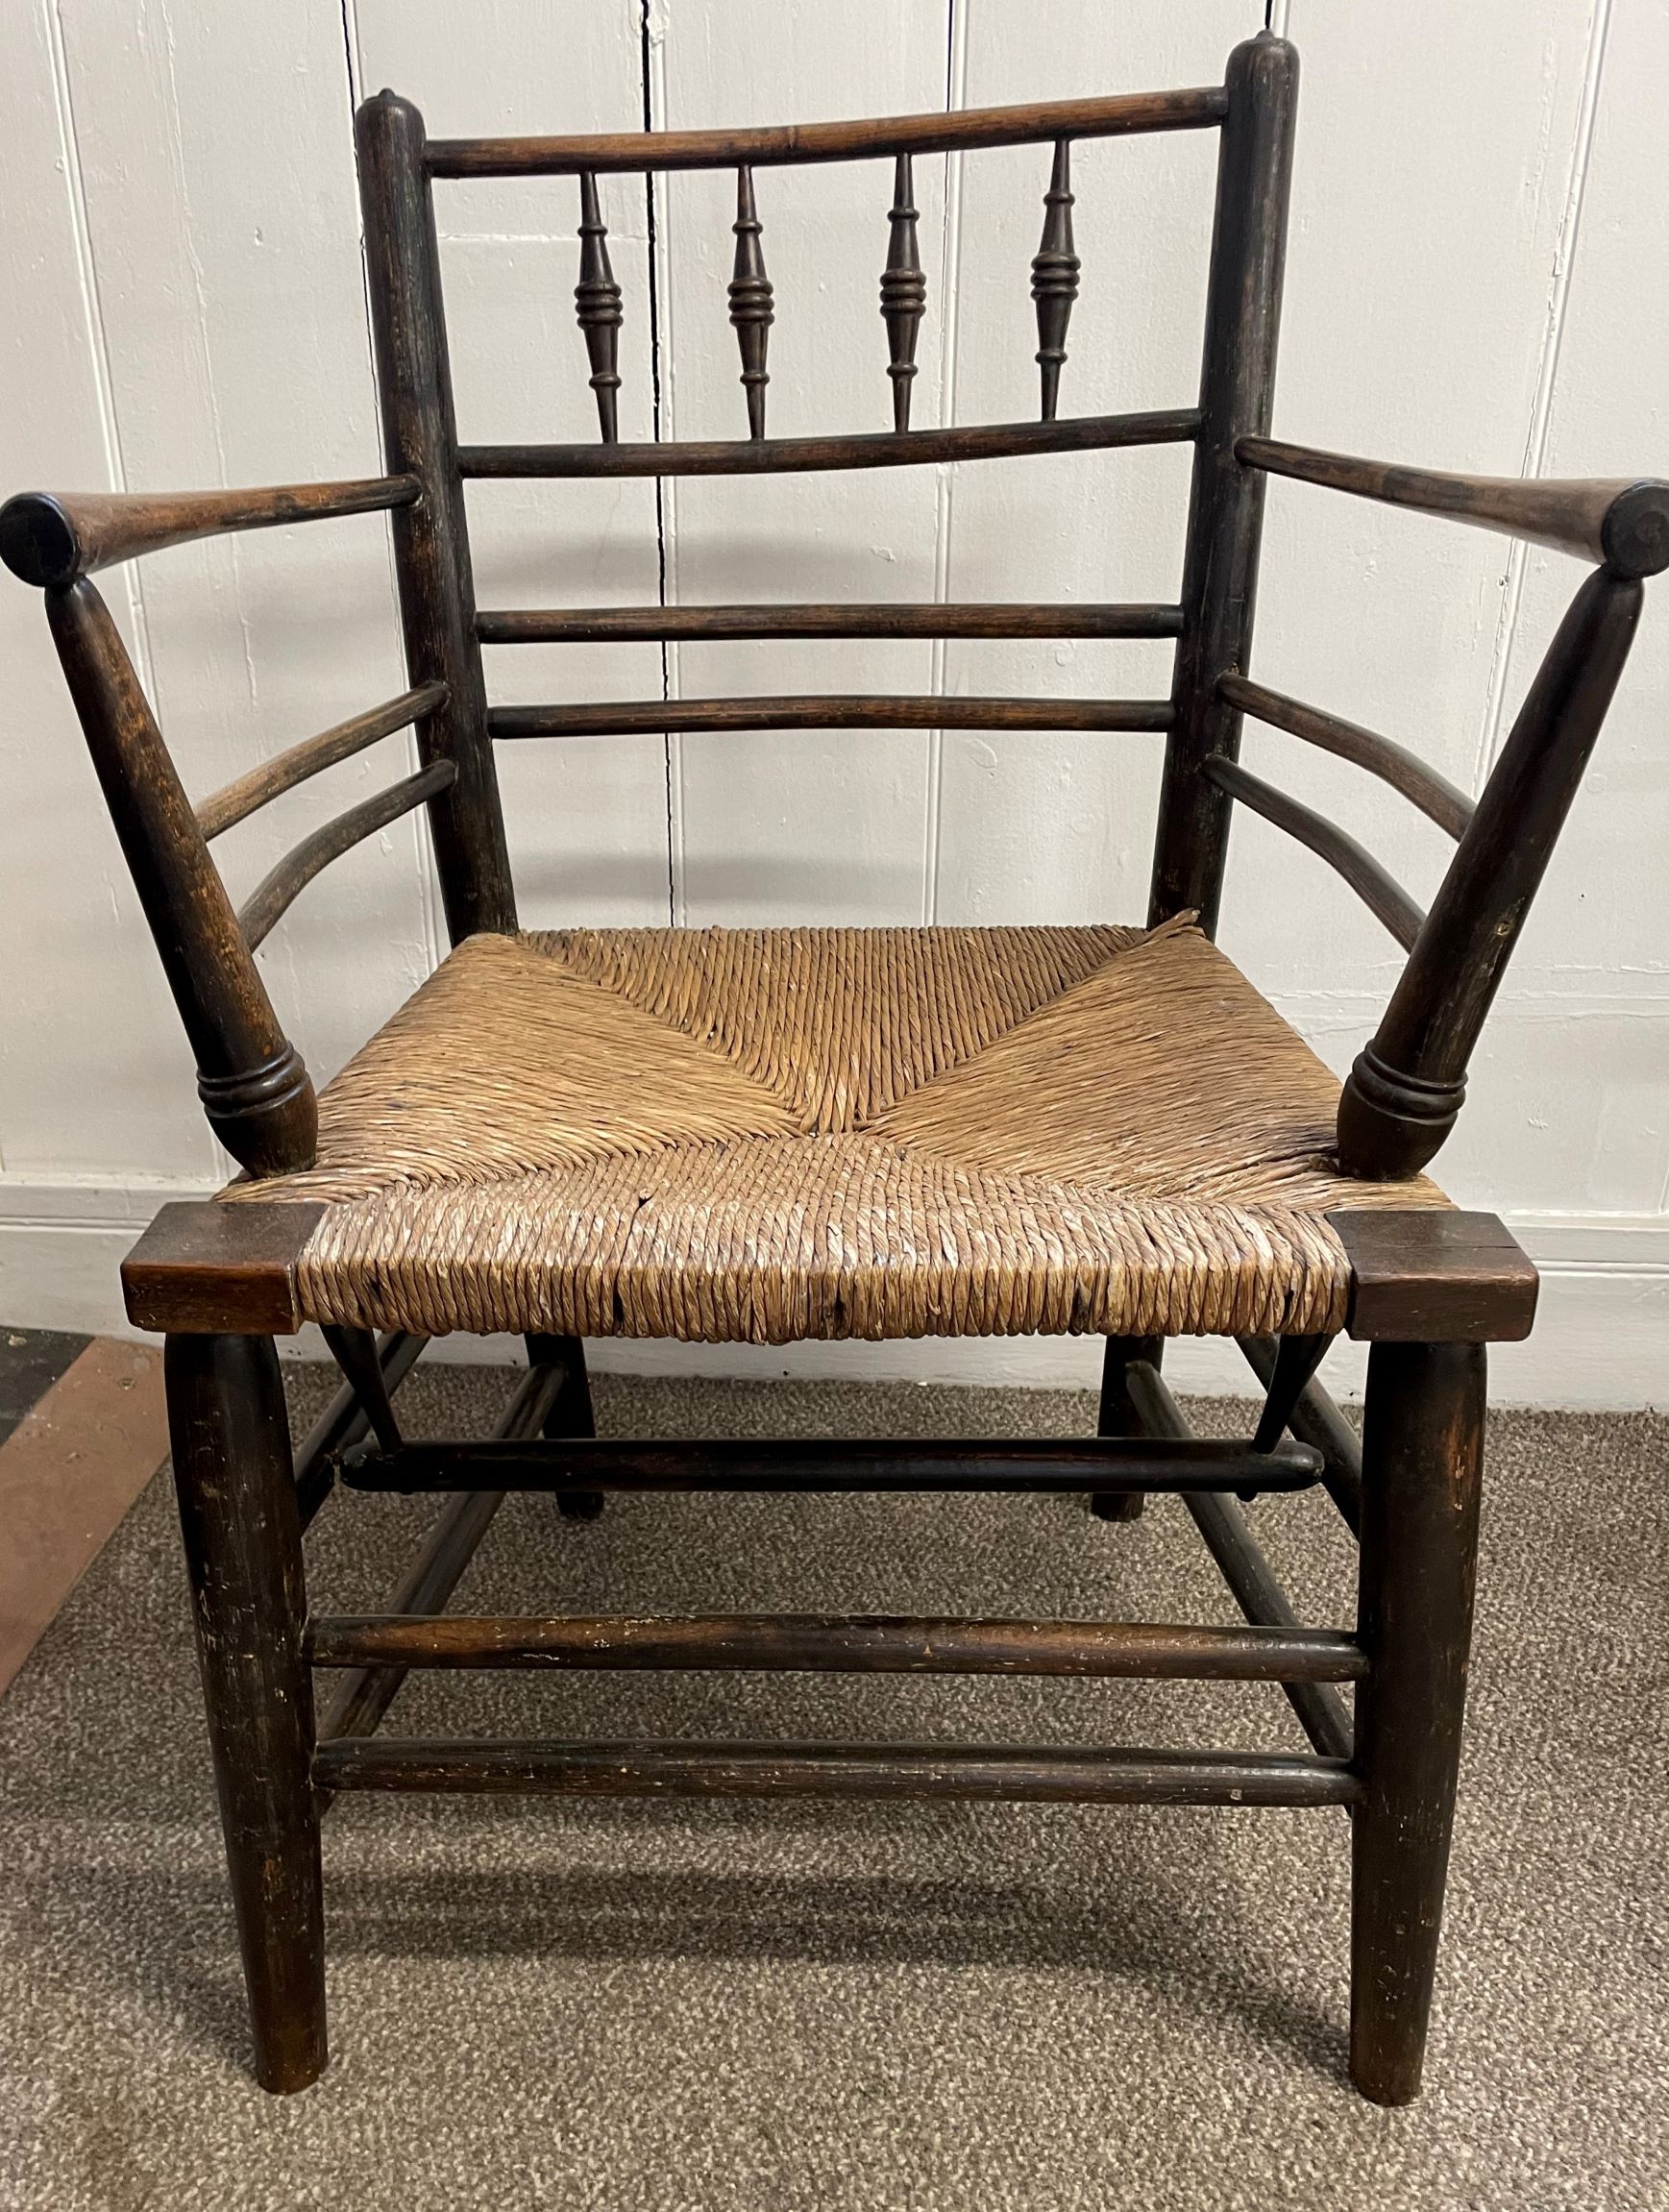 Pair of 19th century William Morris Sussex Carver chairs in ebonised beech & elm with rush seats. - Image 2 of 5